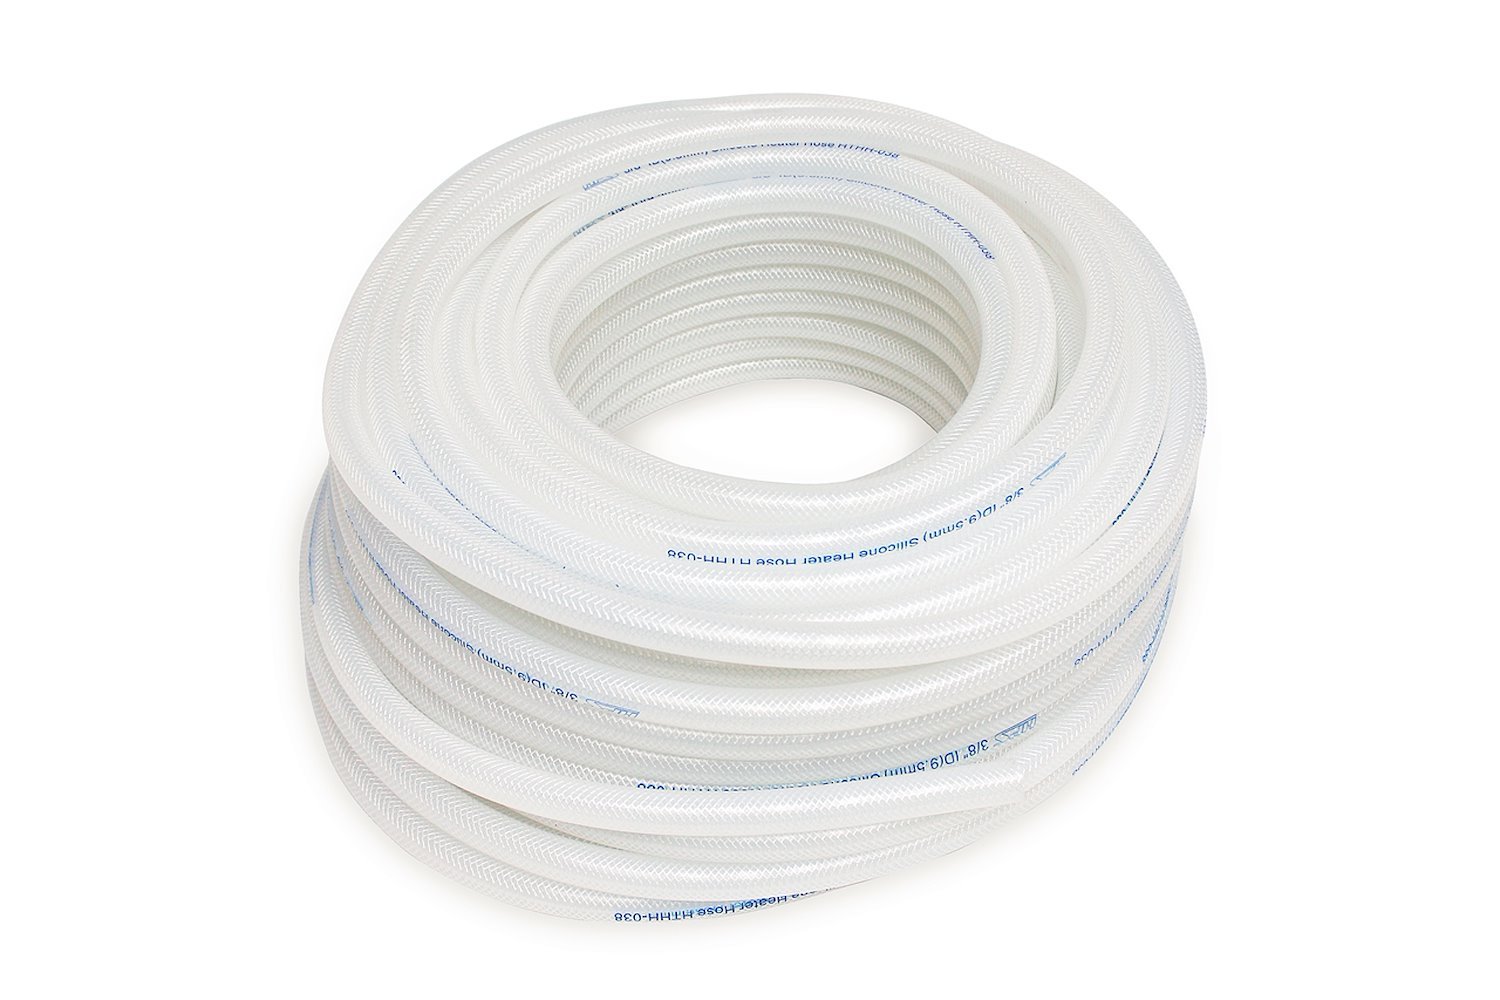 HTHH-100-CLEARx100 Silicone Heater Hose Tubing, High-Temp 1-Ply Reinforced, 1 in. ID, 100 ft. Roll, Clear